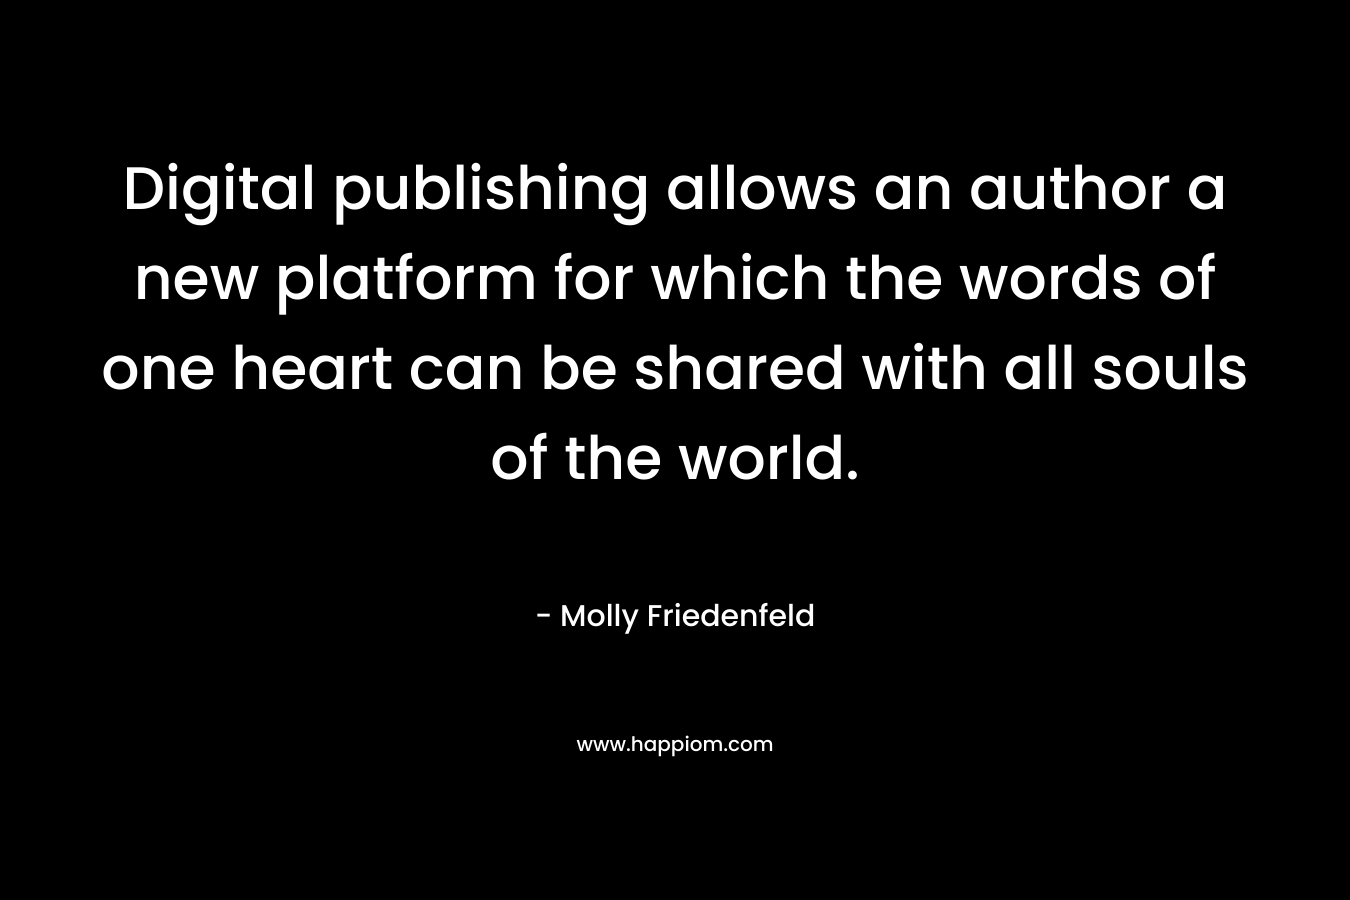 Digital publishing allows an author a new platform for which the words of one heart can be shared with all souls of the world. – Molly Friedenfeld